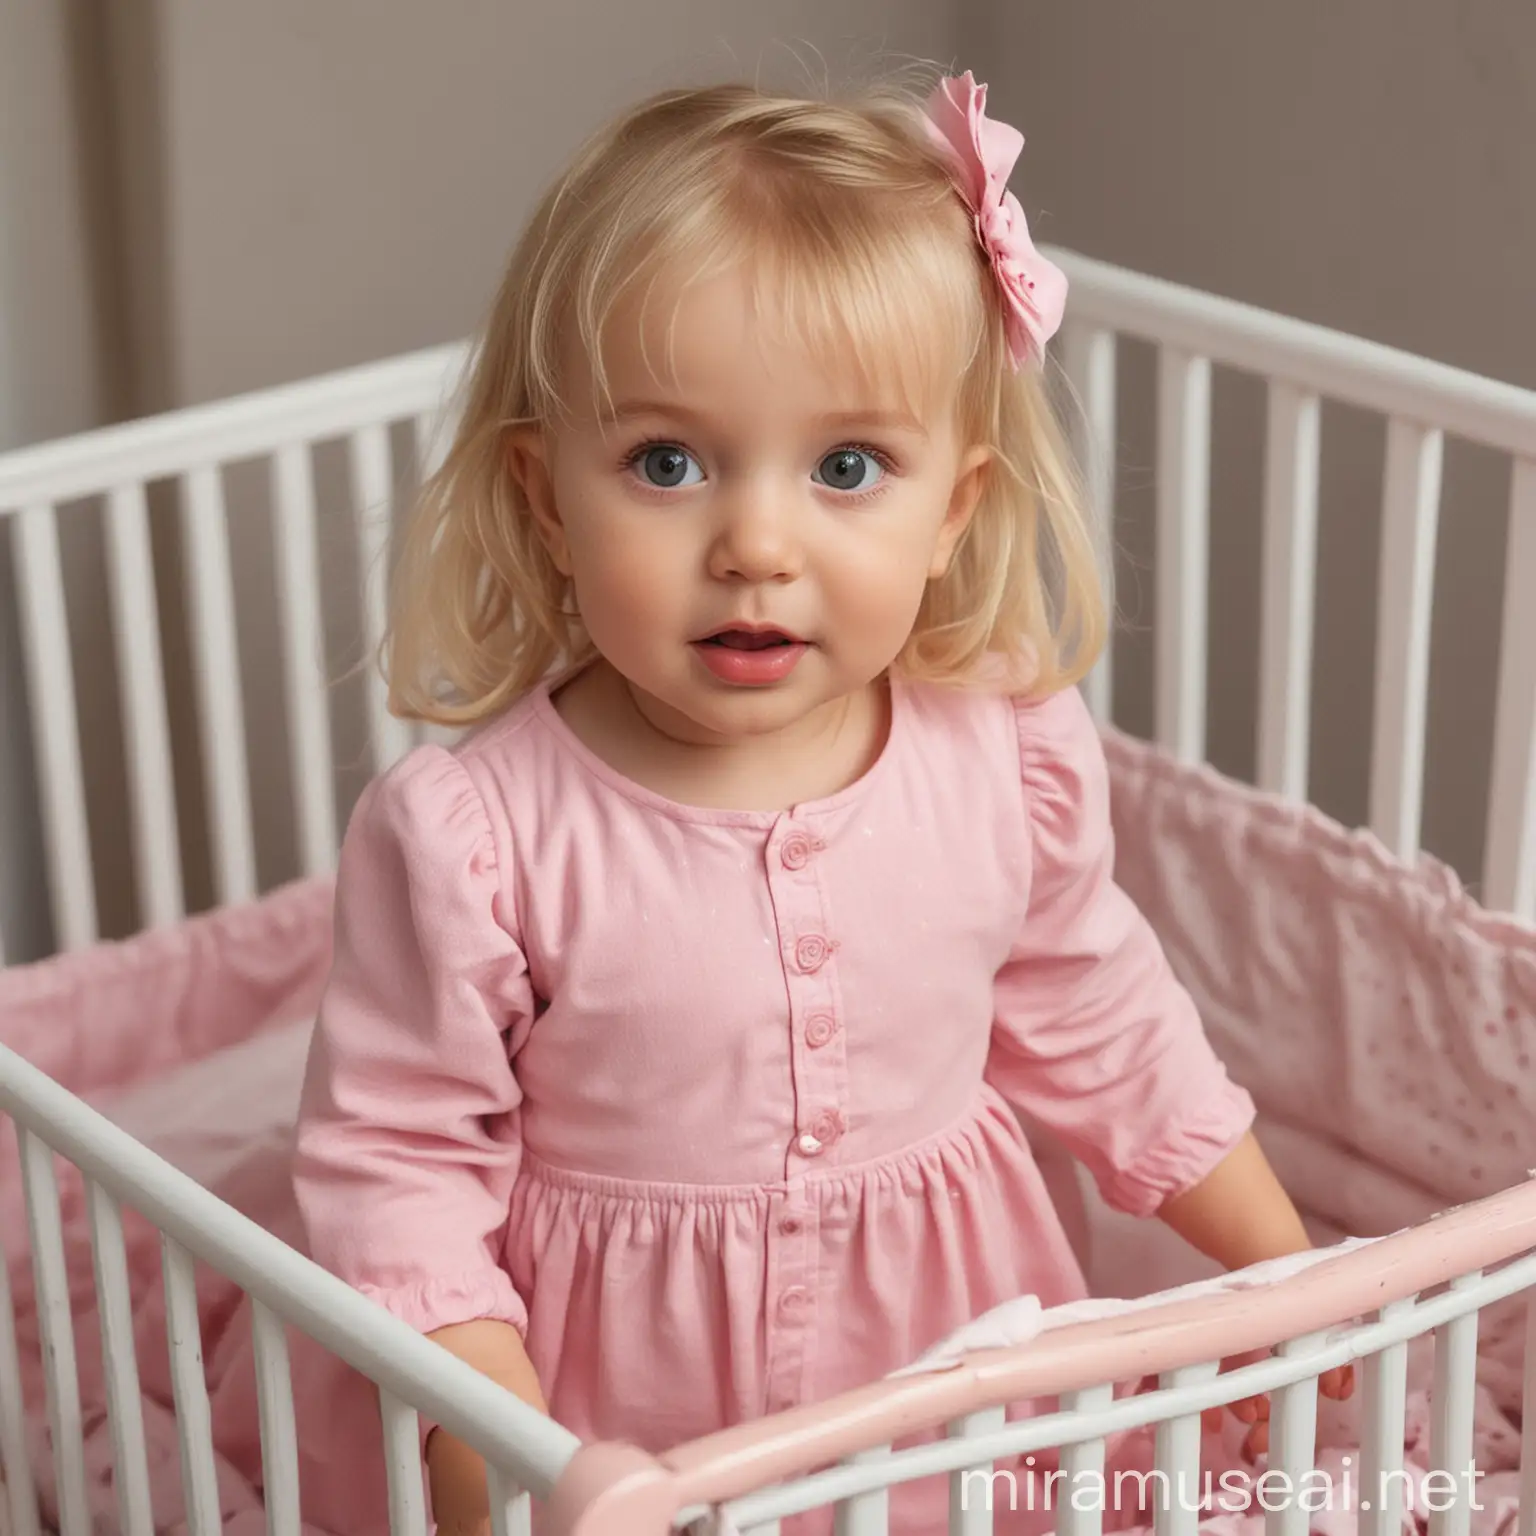 Sweet Baby Girl with Blonde Hair and Pink Dress Standing in Crib